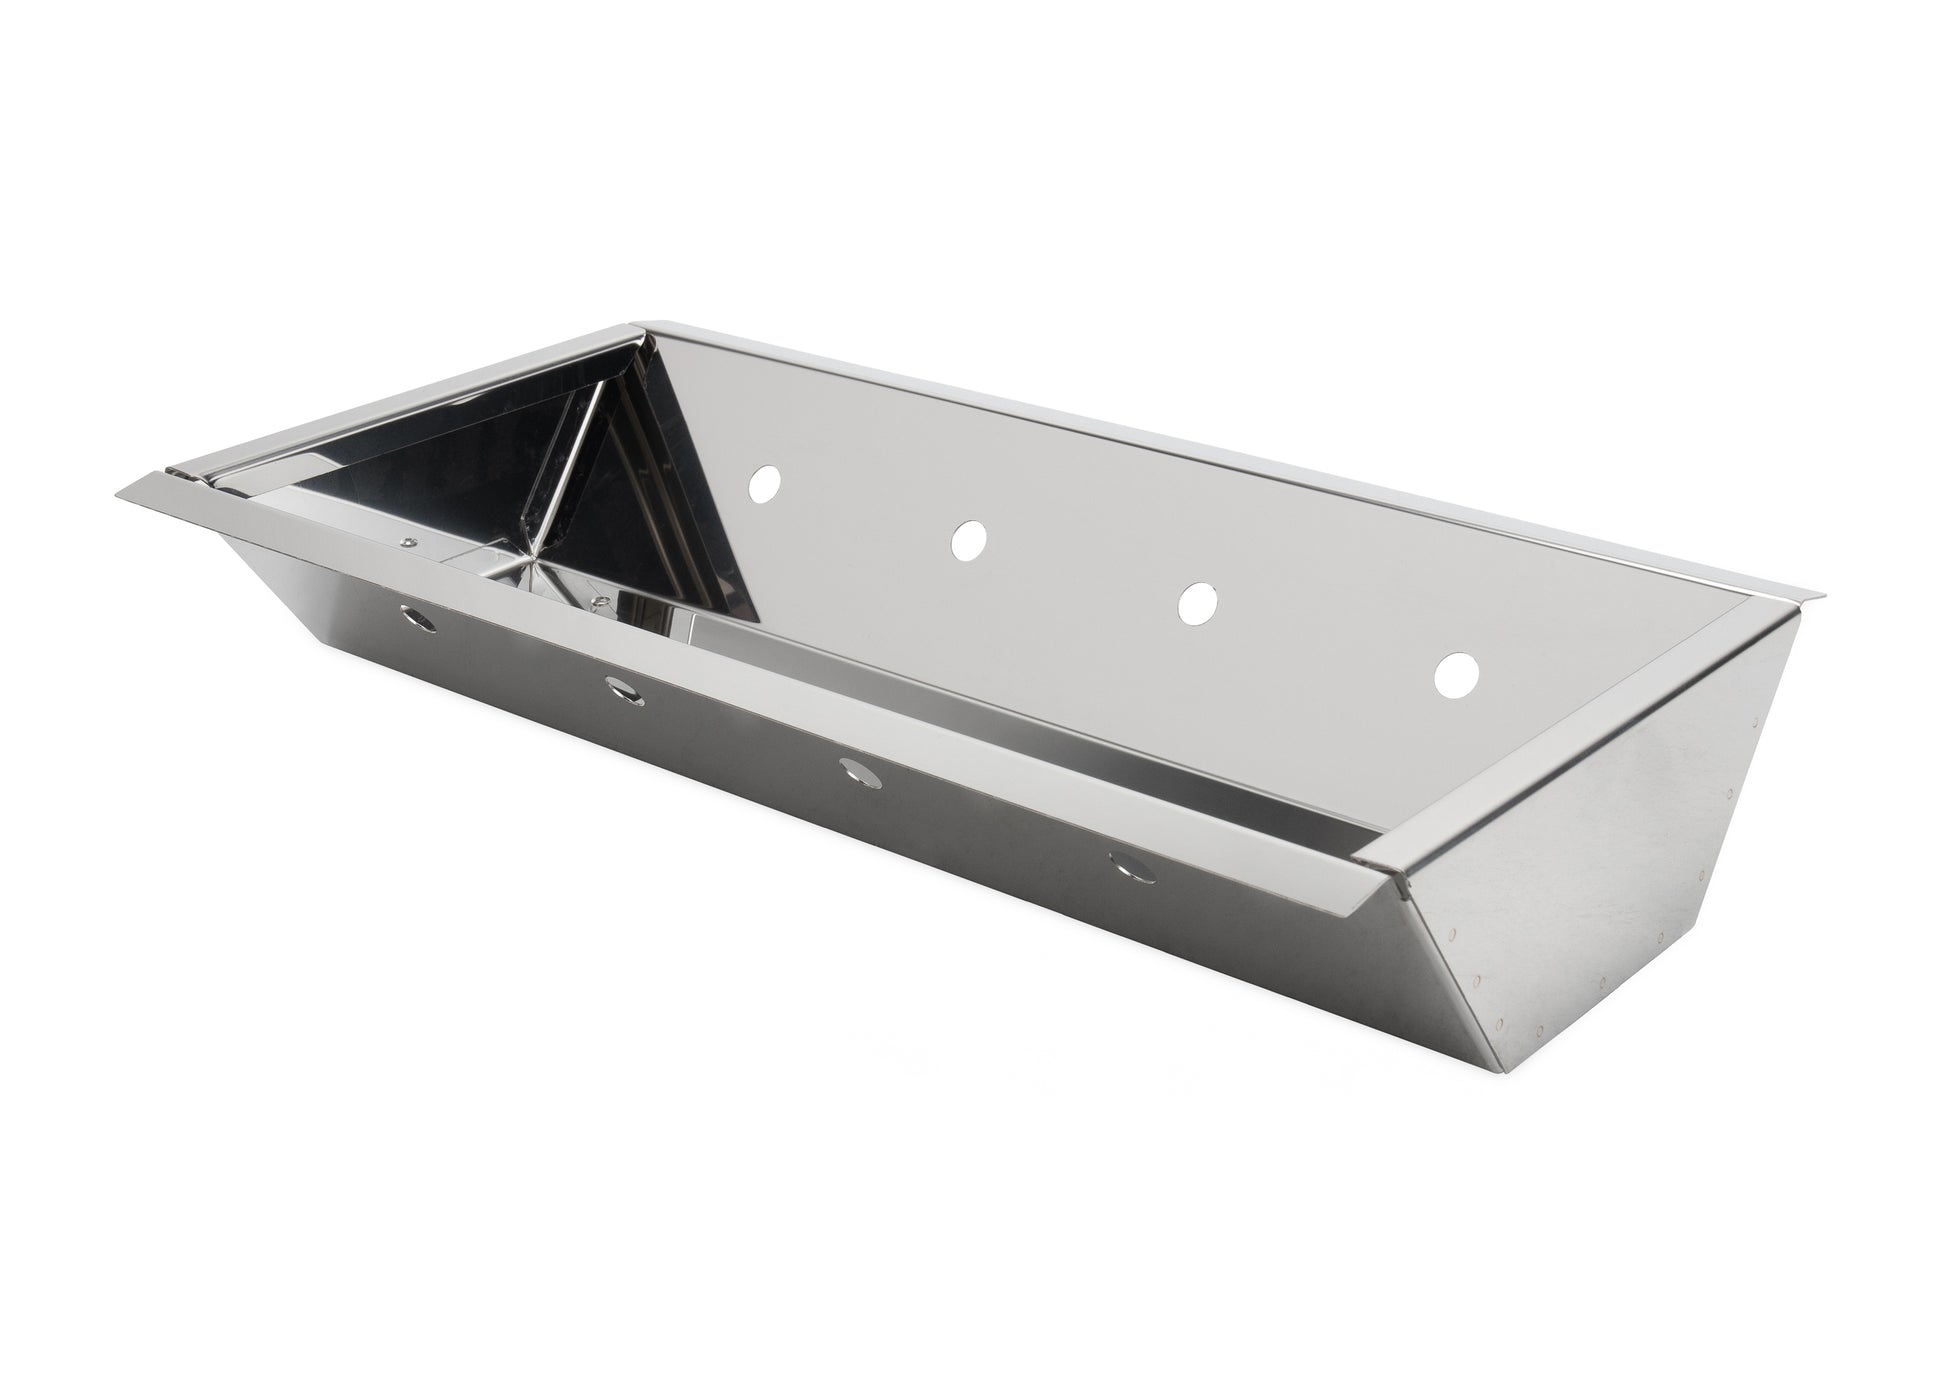 Kuuma Marine Grill Stainless Steel Charcoal Briquette Tray